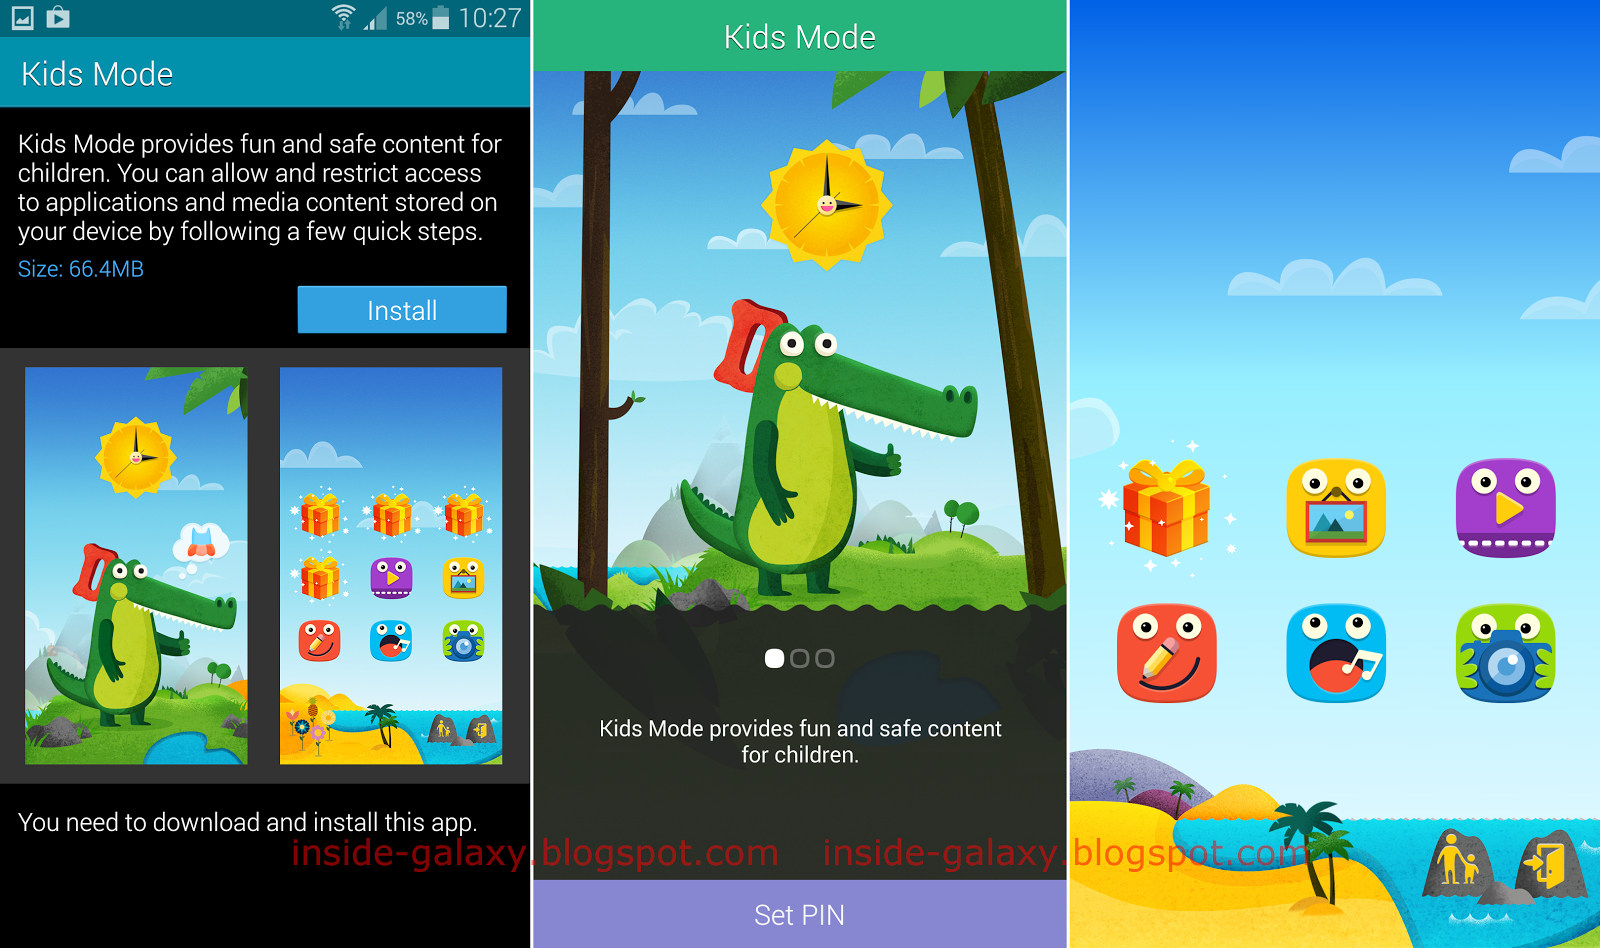 ... : How to Install, Configure and Use Kids Mode in Android 4.4.2 Kitkat